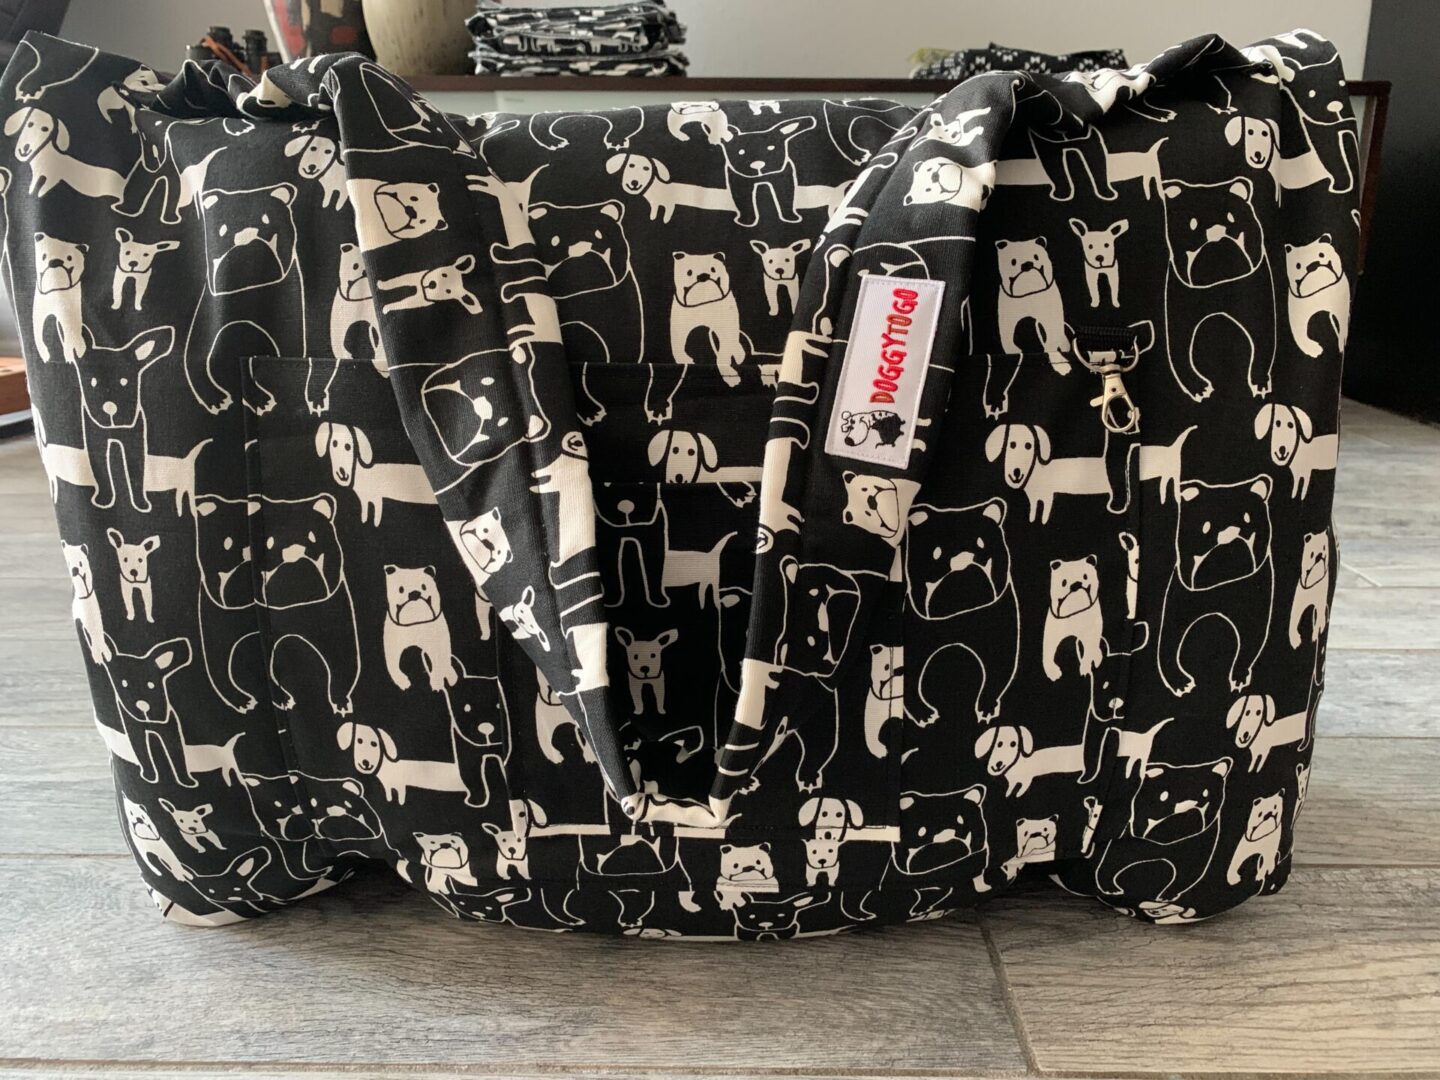 An enlarged image of a black color bed bag with white color designs on it